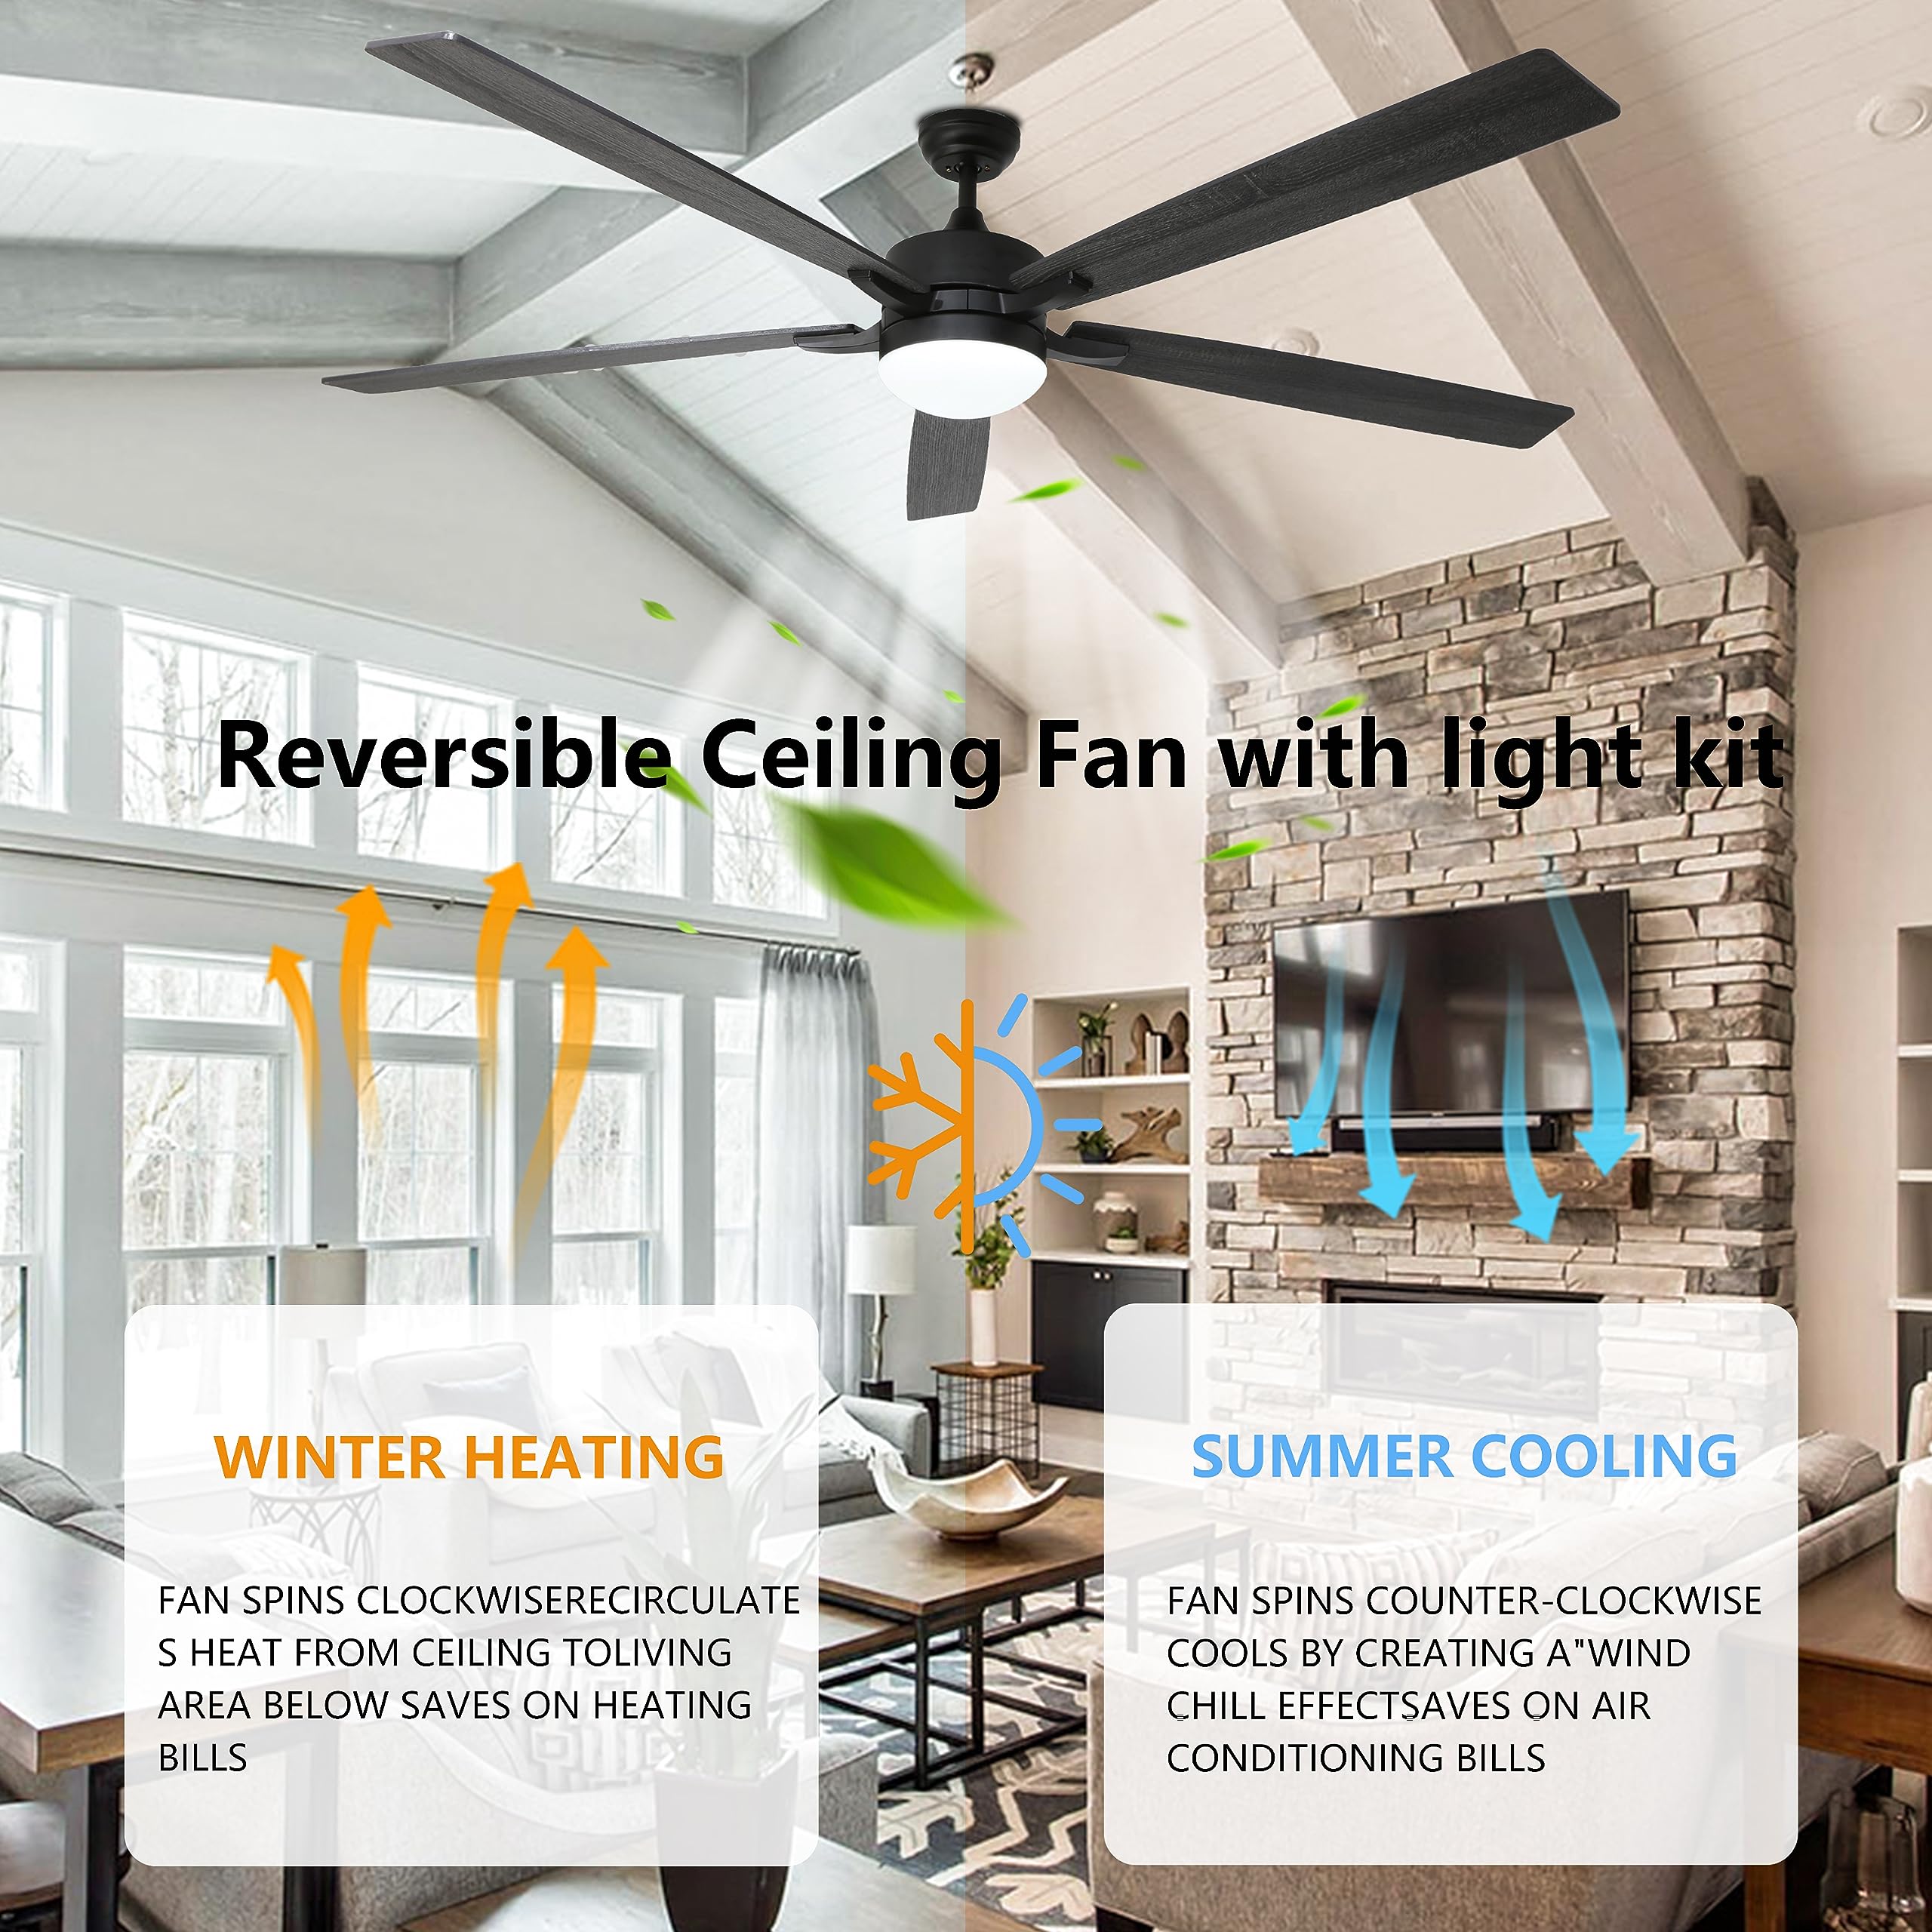 Ohniyou Large Ceiling Fan with Light and Remote, 76 inch Farmhouse Outdoor Ceiling Fan with LED Light,Extra Large Big Commercial Ceiling Fan with Light for Garage Shop Indoor